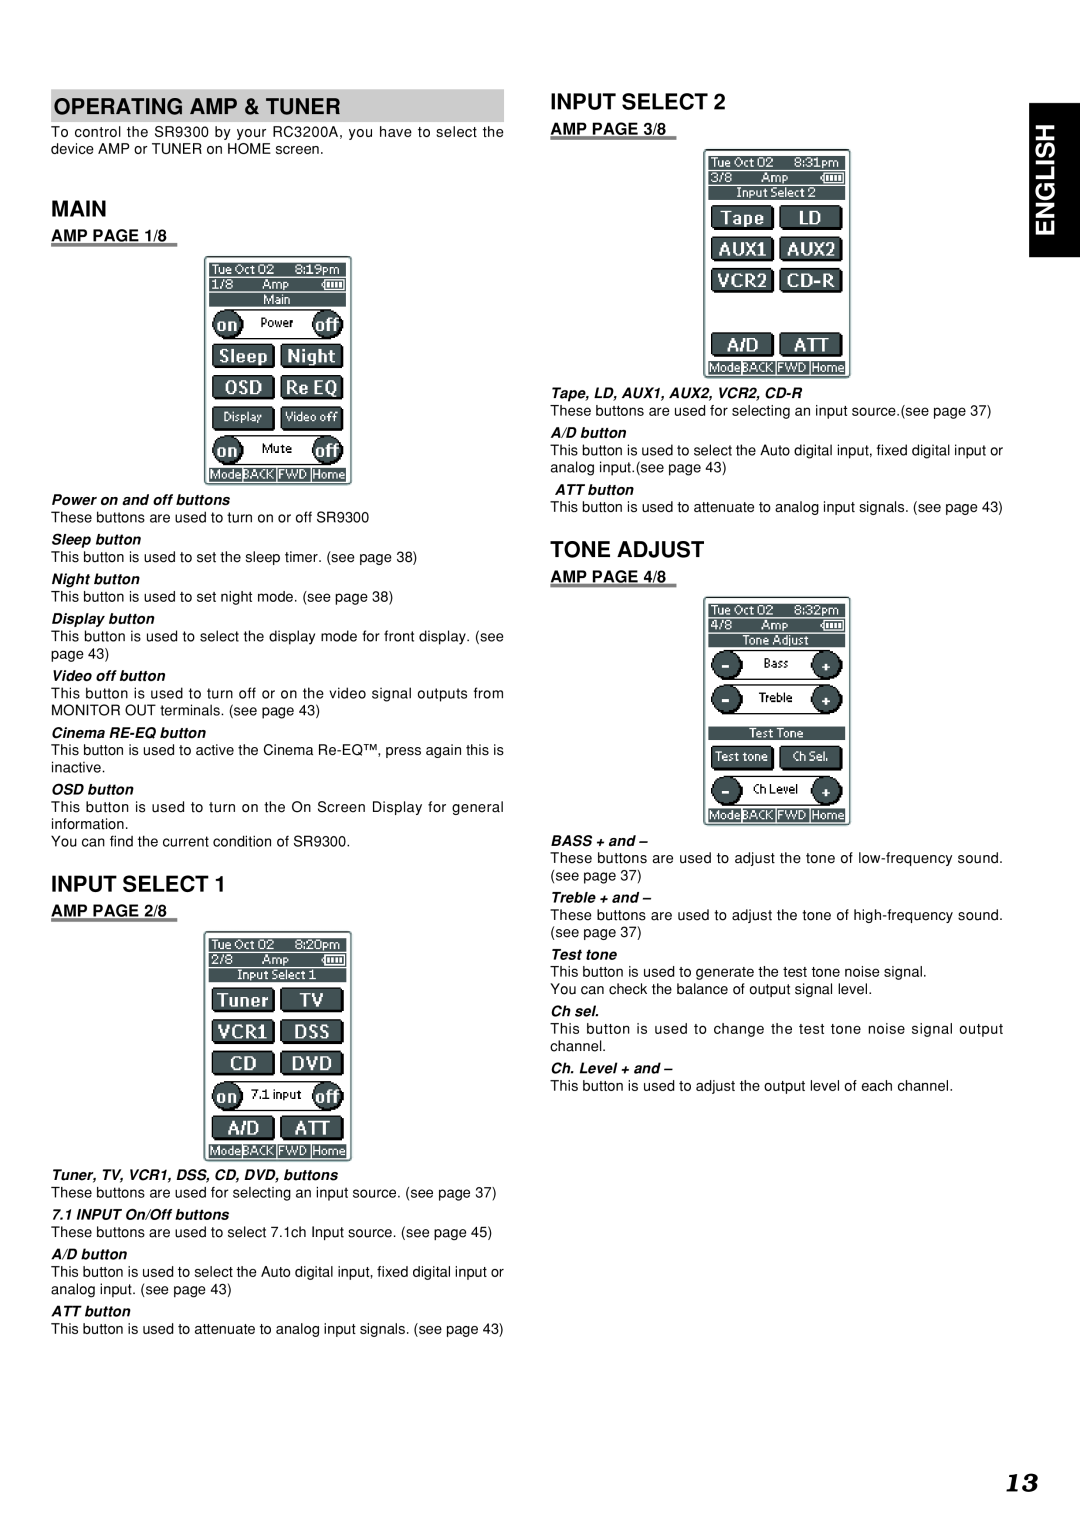 Marantz SR9300 English, AMP PAGE 1/8, AMP PAGE 3/8, AMP PAGE 2/8, AMP PAGE 4/8, Power on and off buttons, Sleep button 